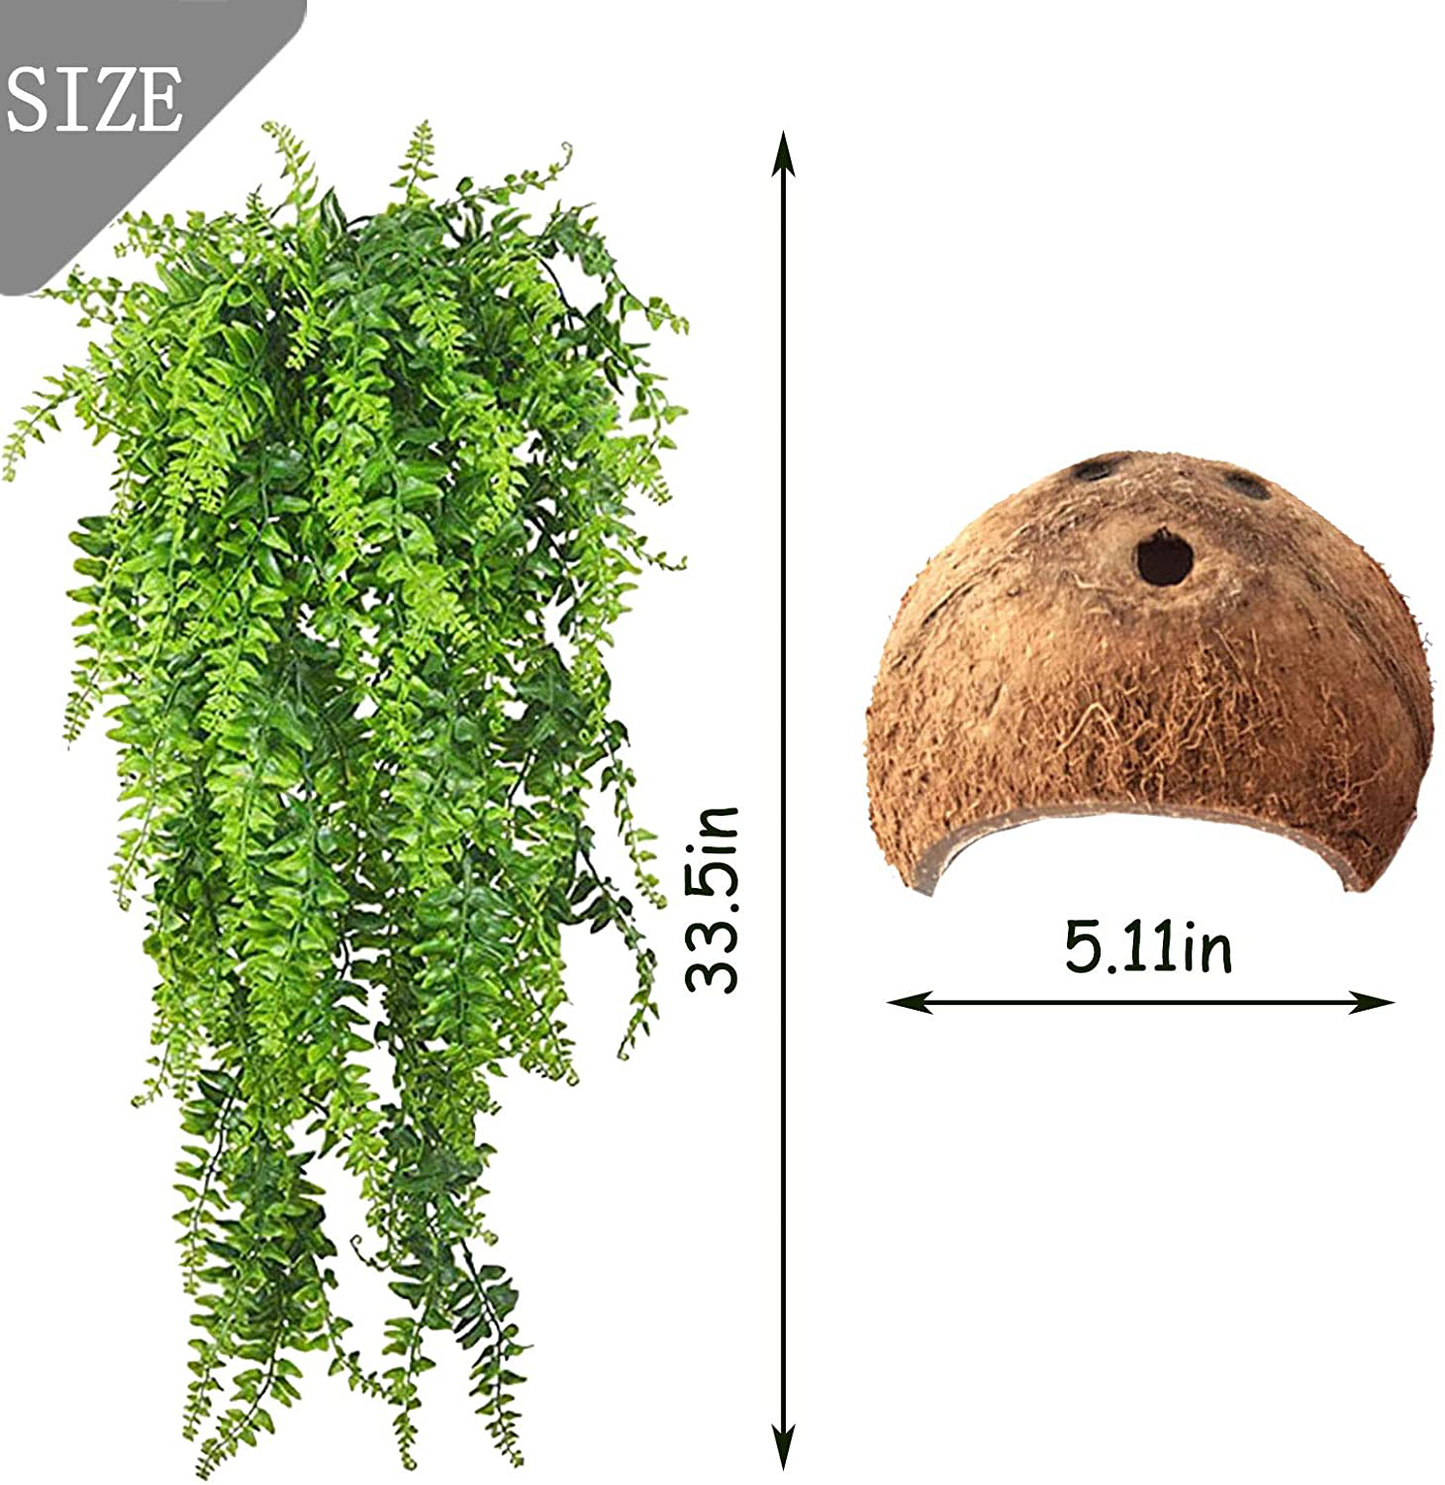 Tfwadmx Reptile Plants Hanging Fake Vines Lizard Coconut Coco Shell Hut Boston Climbing Terrarium Plant with Suction Cup for Bearded Dragons,Geckos,Snake and Tank Habitat Decorations(4 Pcs) Animals & Pet Supplies > Pet Supplies > Reptile & Amphibian Supplies > Reptile & Amphibian Habitats Tfwadmx   